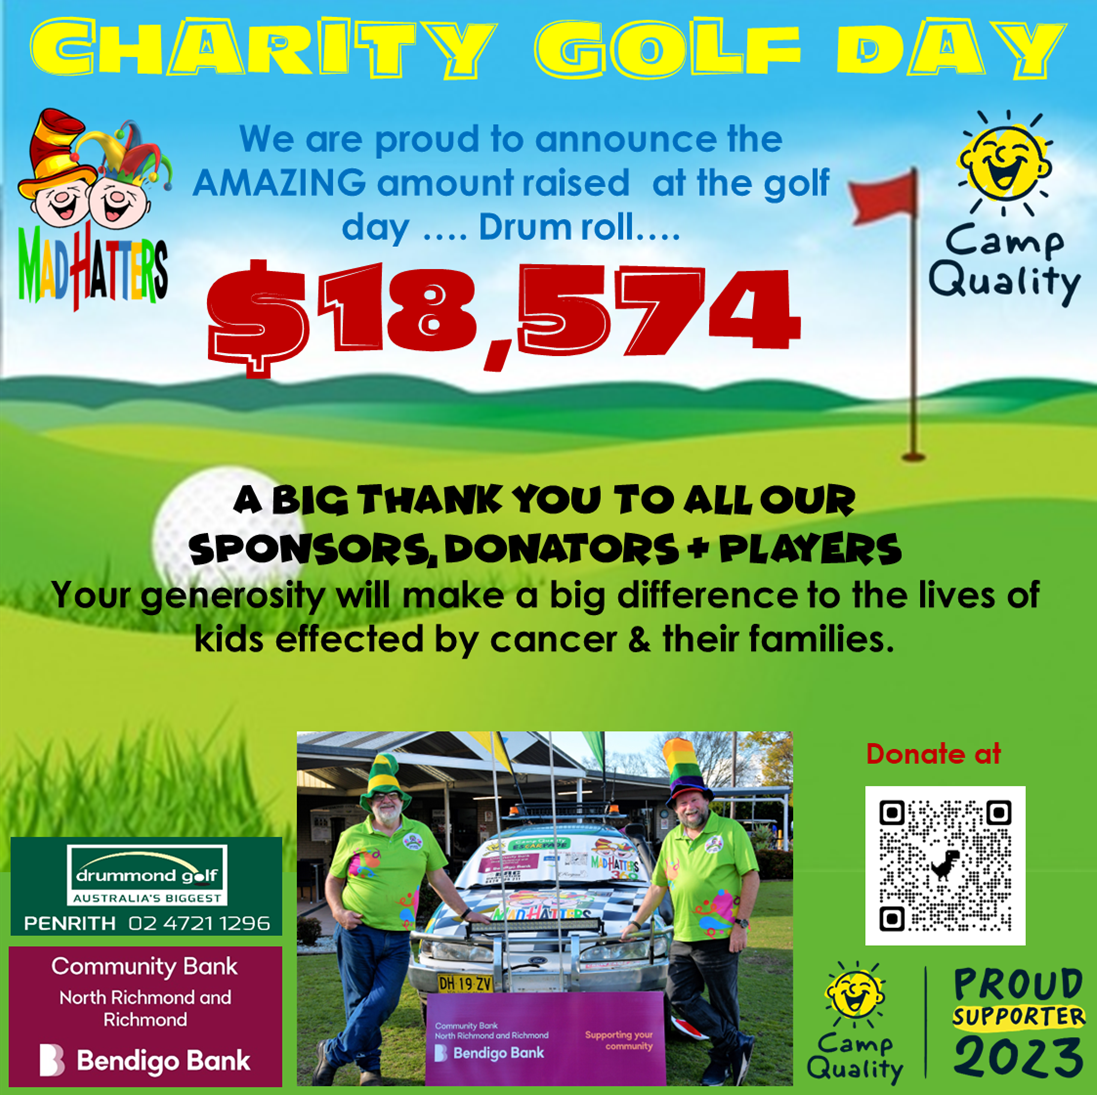 Car369 Madhatters Golf Day 2023 raised $18,574 for Camp Quality